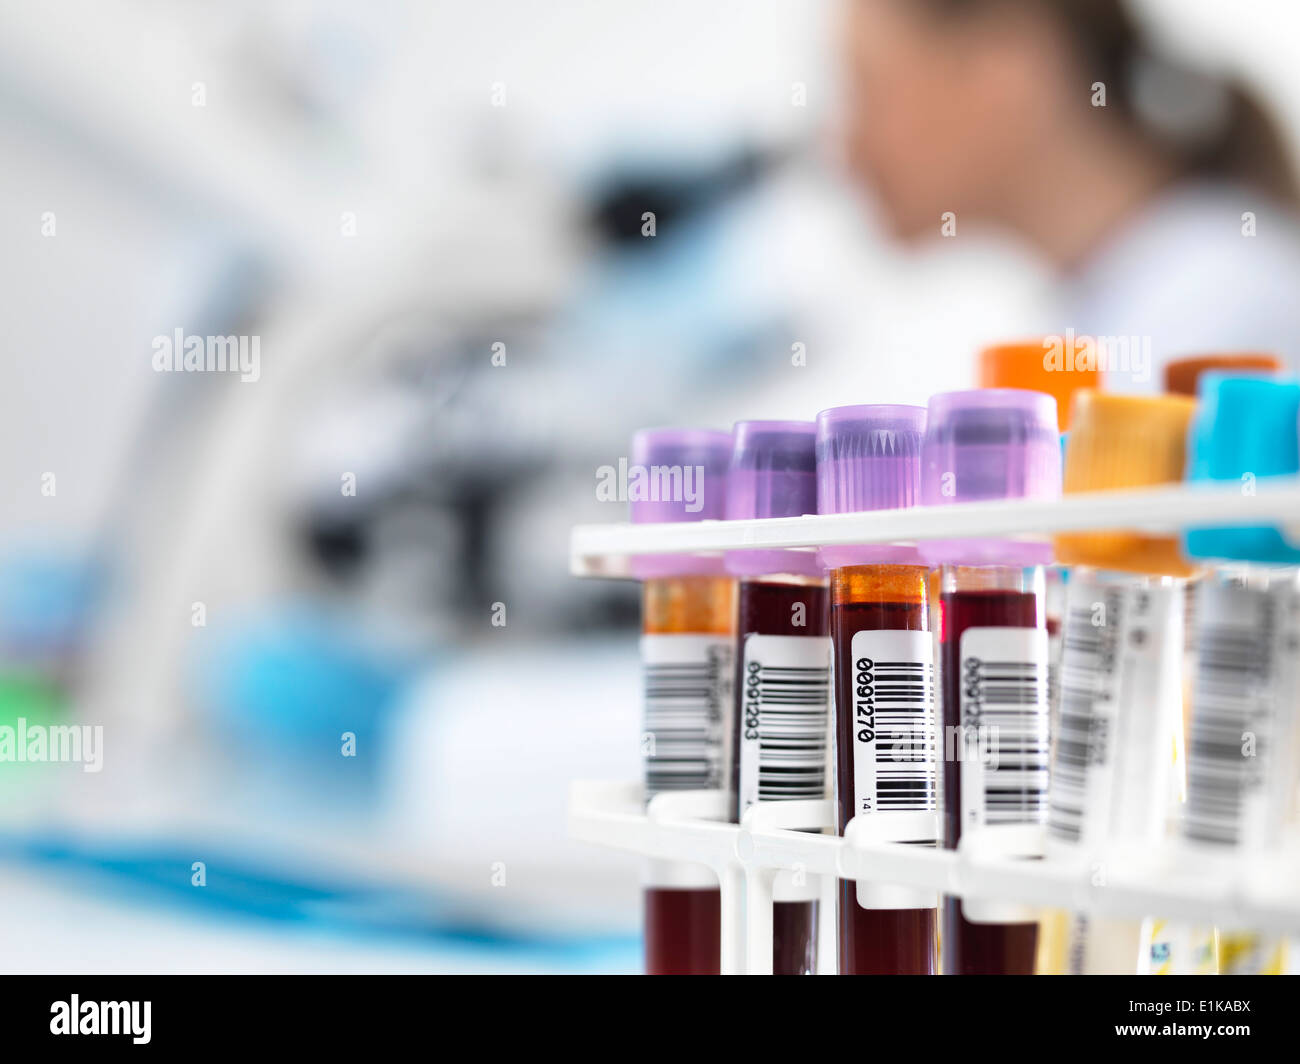 Blood samples in test tube rack with bar codes. Stock Photo